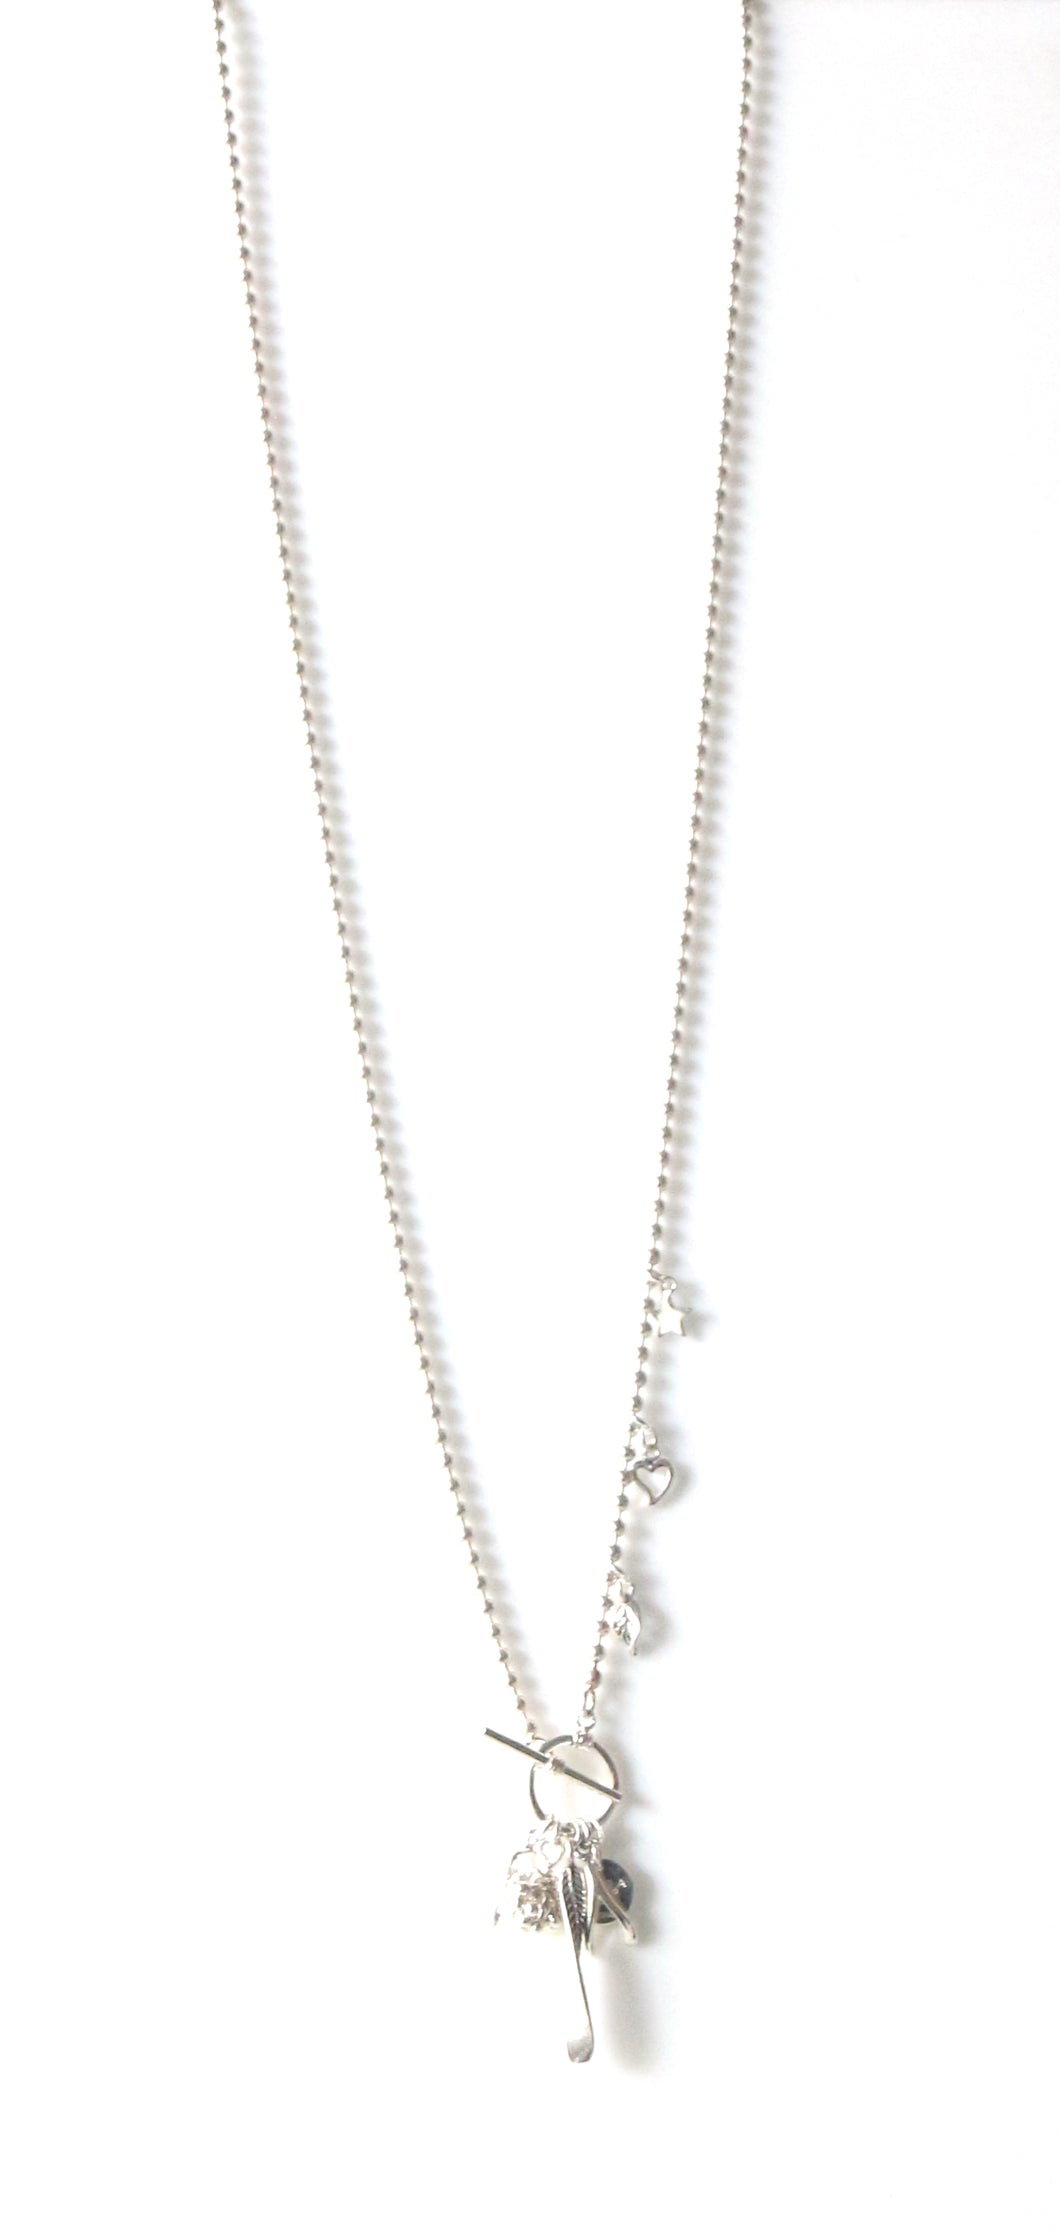 Sterling Silver Ball Chain Necklace with Charms